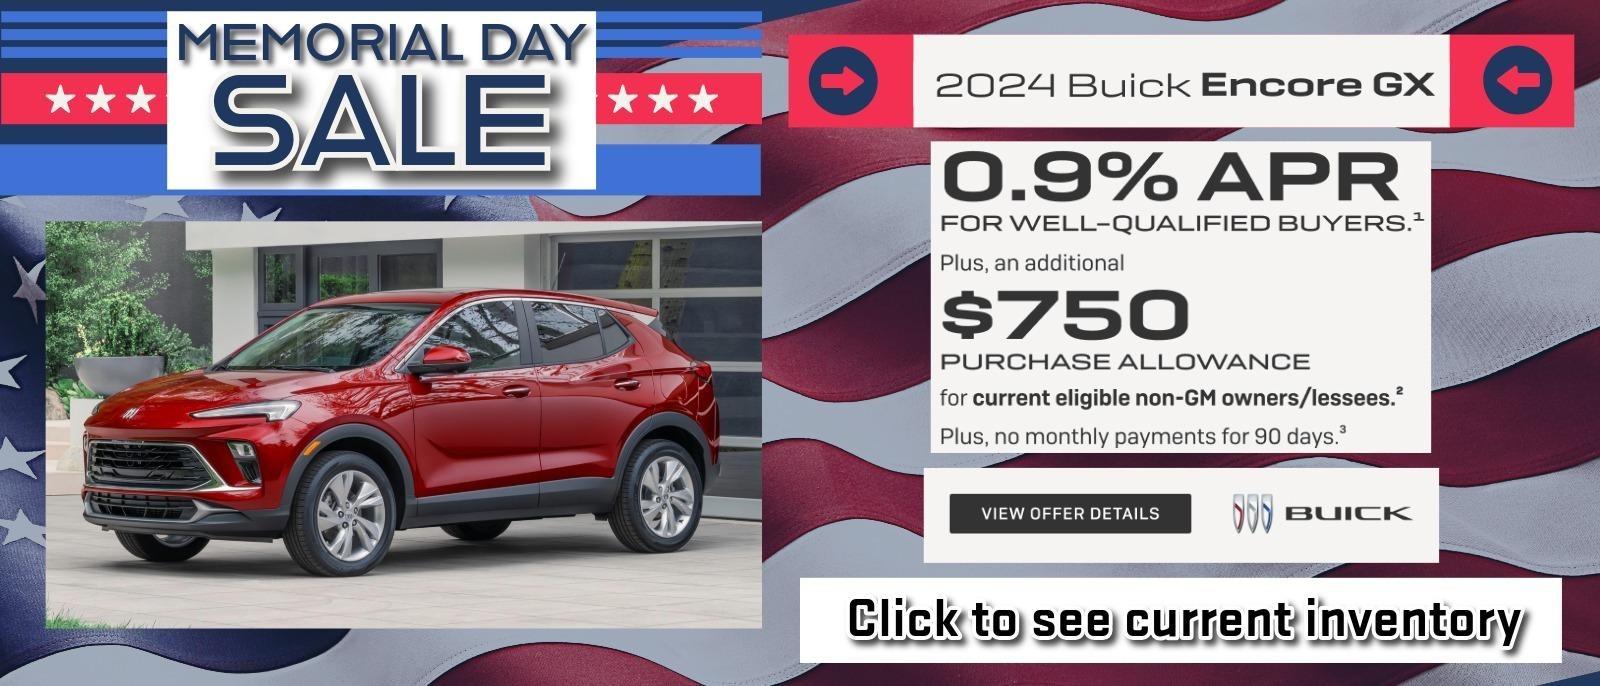 Memorial Day Slide for 2024 Buick Encore GX Offer of 0.9% Apr plus an additional $750 purchase allowance.  With Approved Credit.  Some restrictions apply.